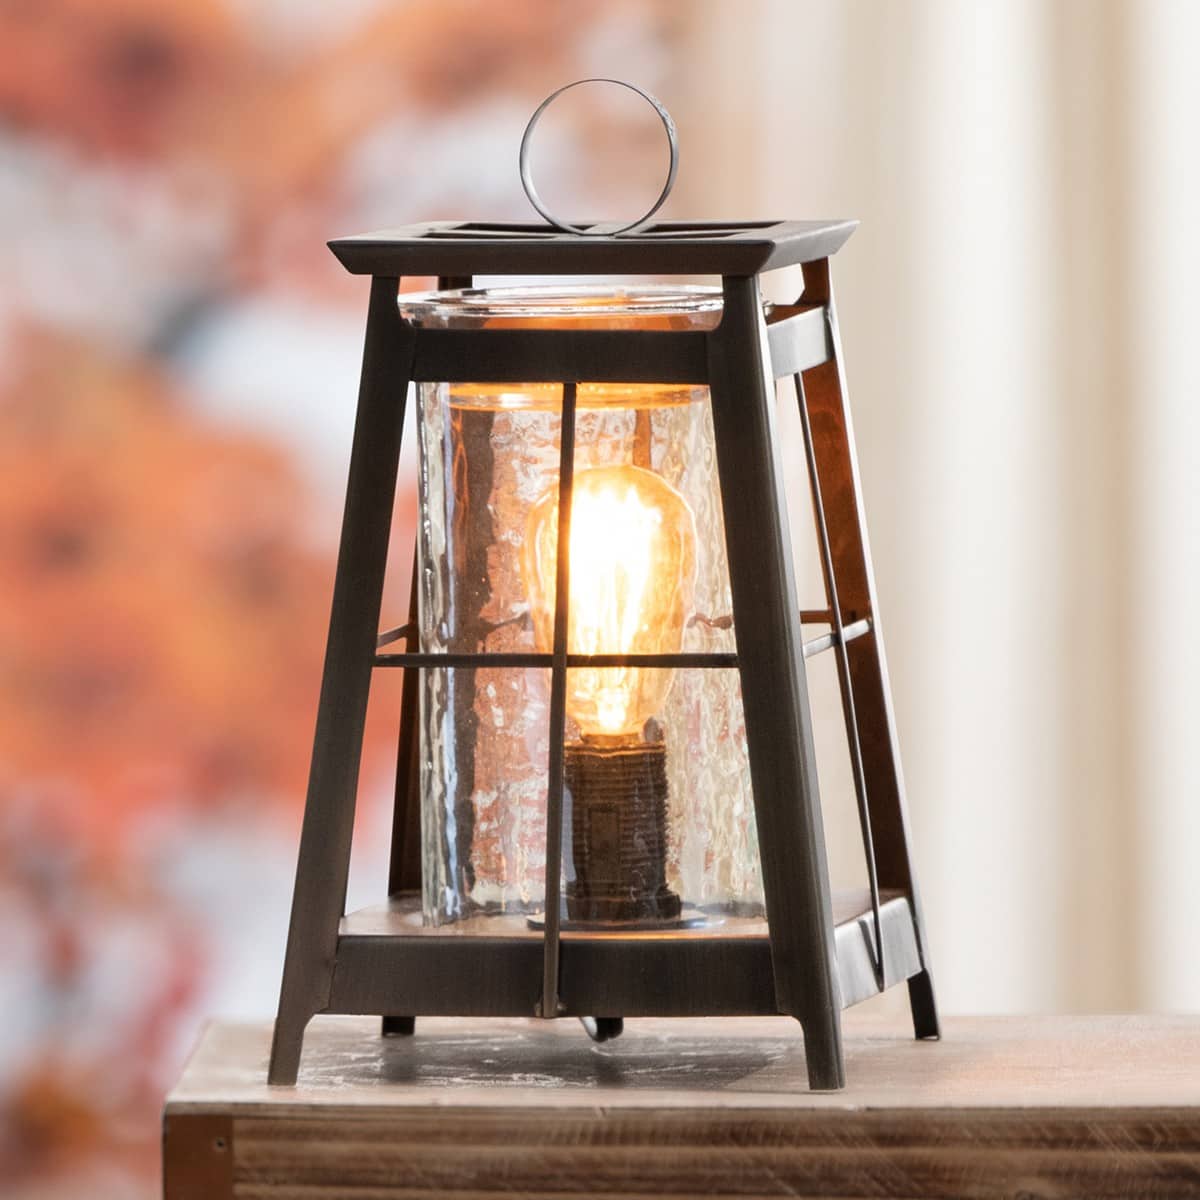 Shining Light Scentsy Warmer - The Candle Boutique - Scentsy UK Consultant